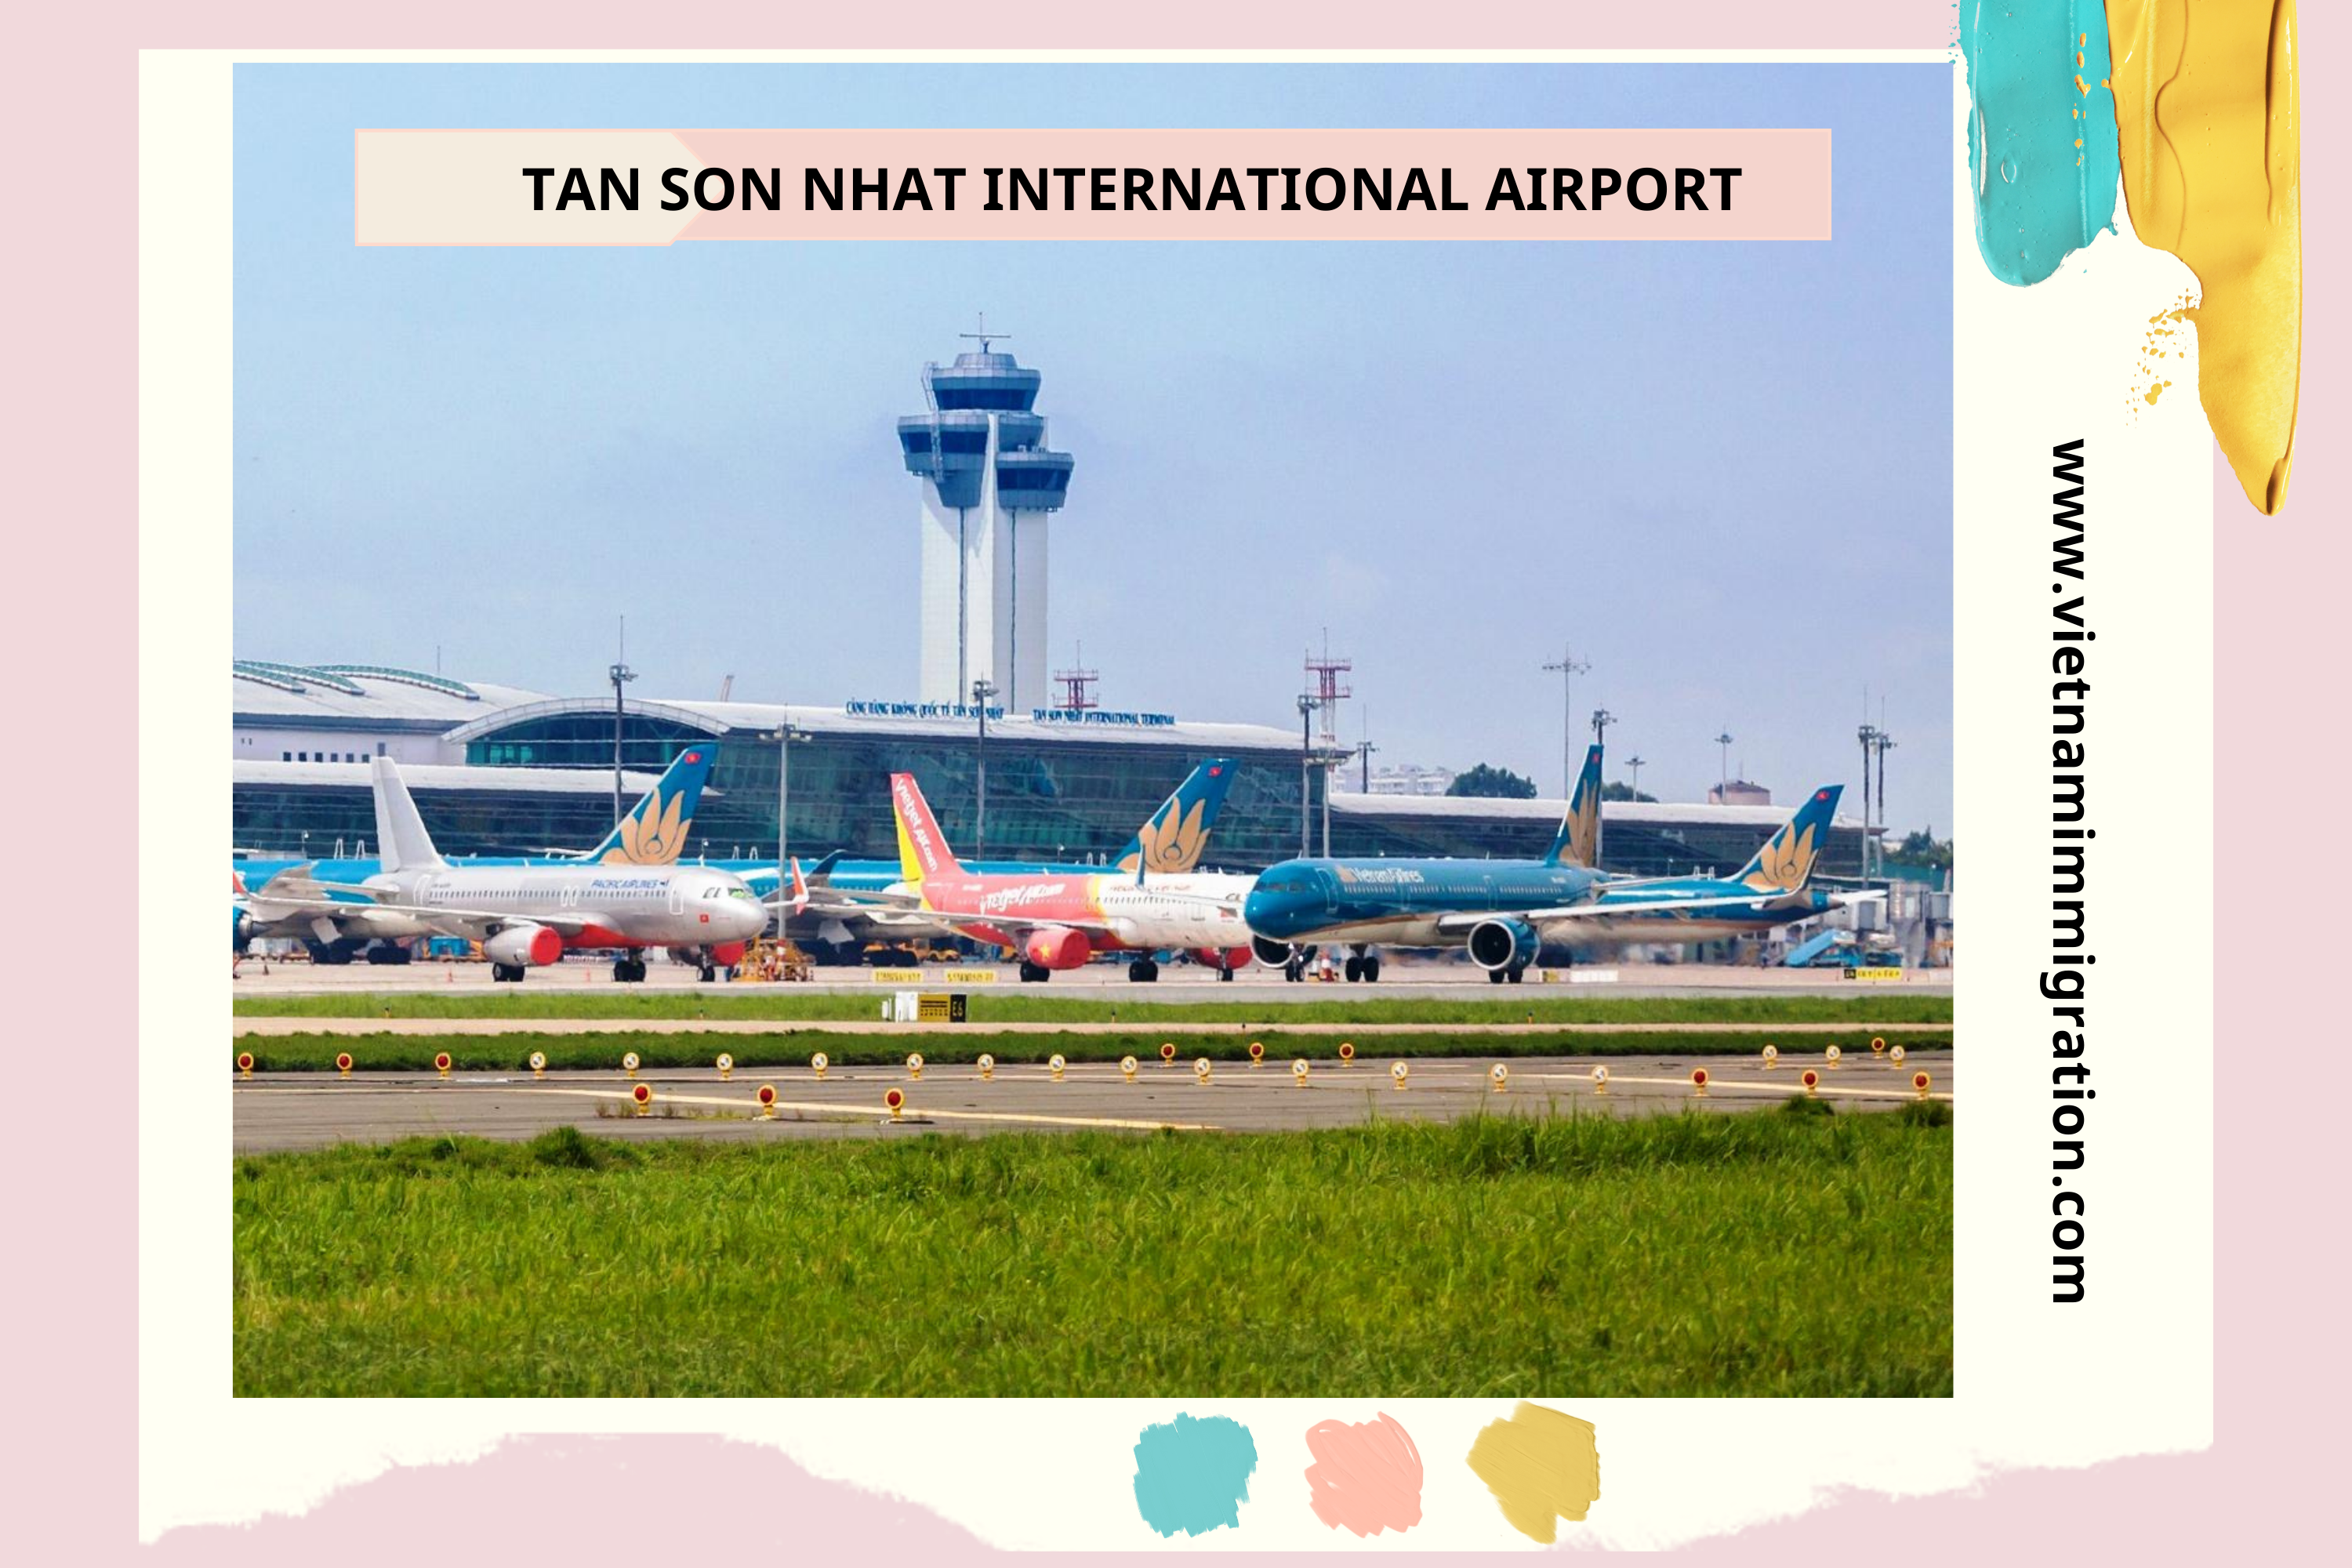 Vietnam E-visa for Travelers Flying into Tan Son Nhat Airport in 2024 – How to Apply for a Vietnam E-visa to Enter Tan Son Nhat Airport